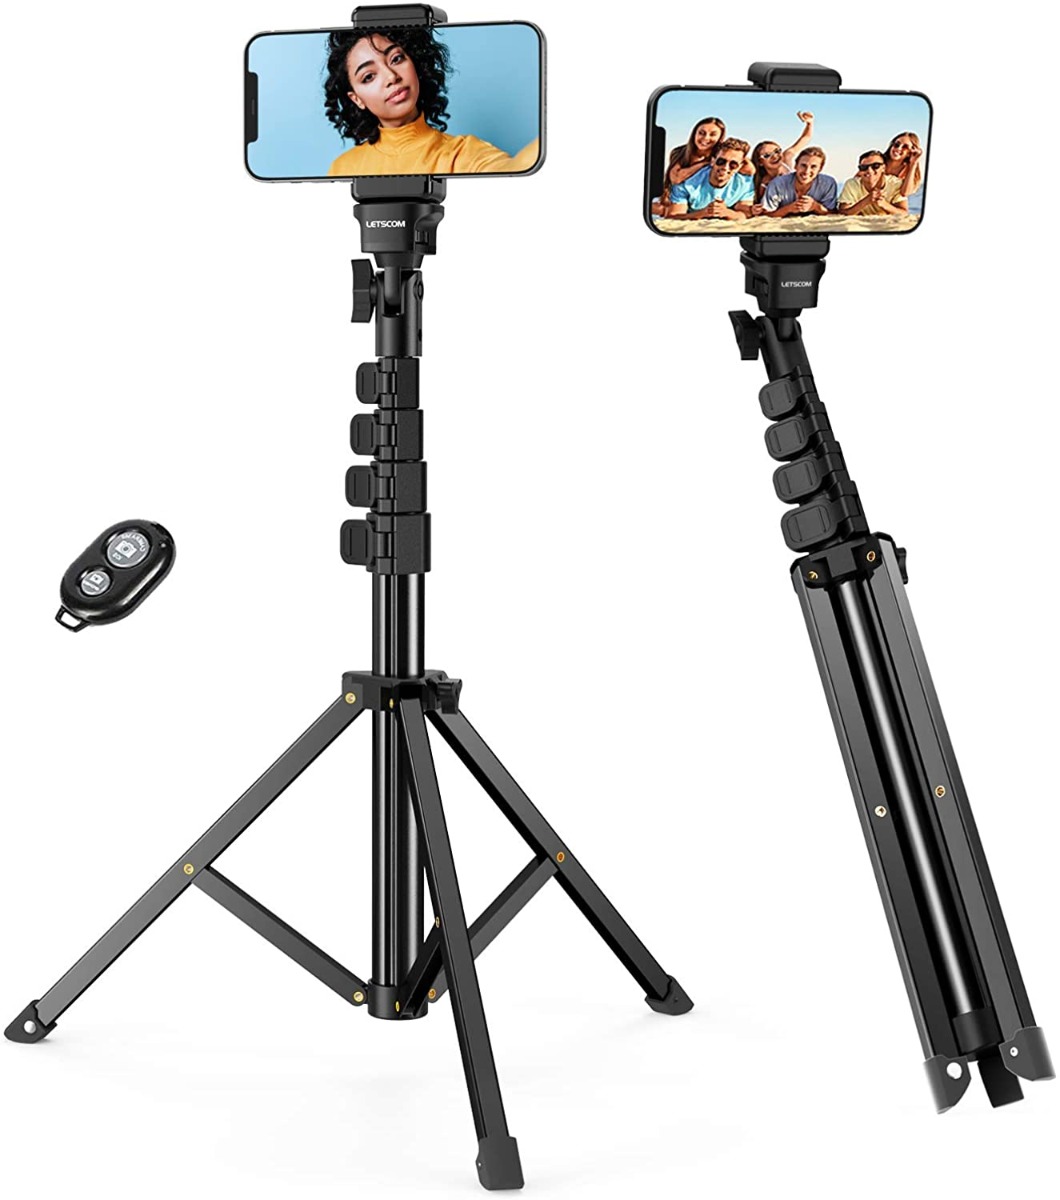 65-inch Extendable Stick Tripod Stand with Holder